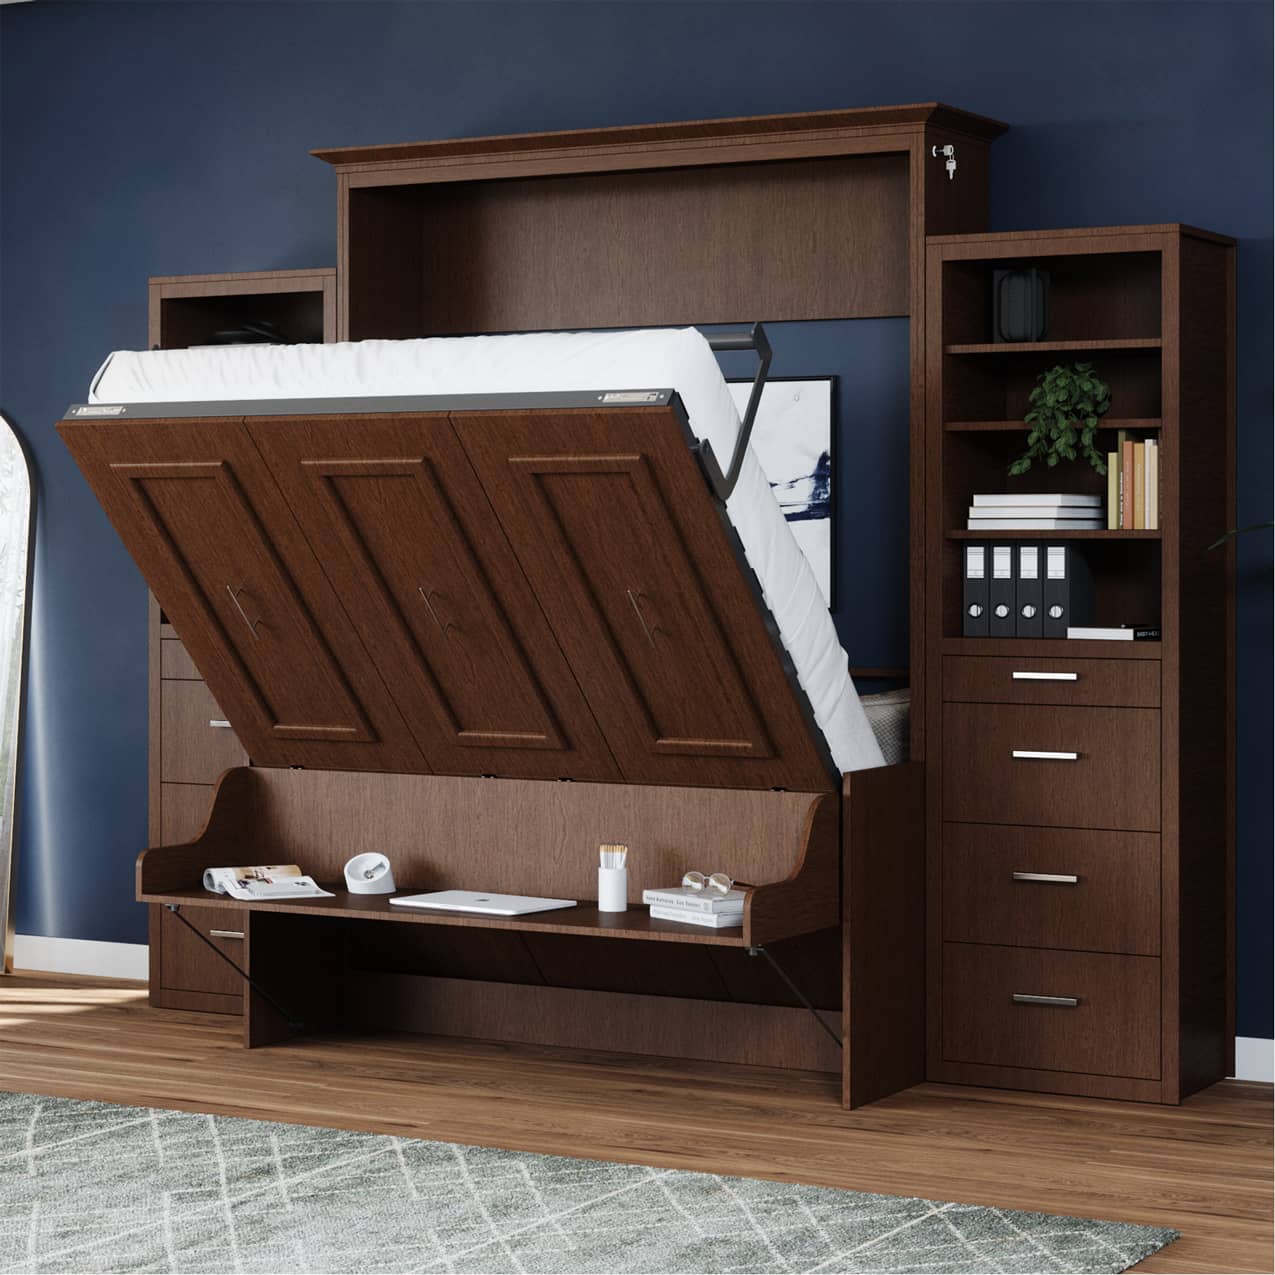 coventry full murphy bed with desk bed open to 4 degrees showing the desk staying level hidden hideaway hide away hide-a-way diy murphy bed kit fold out pull down wall bed cabinet desk bed combo home office guest bed customizable storage adjustable shelves pullout nightstand drawers